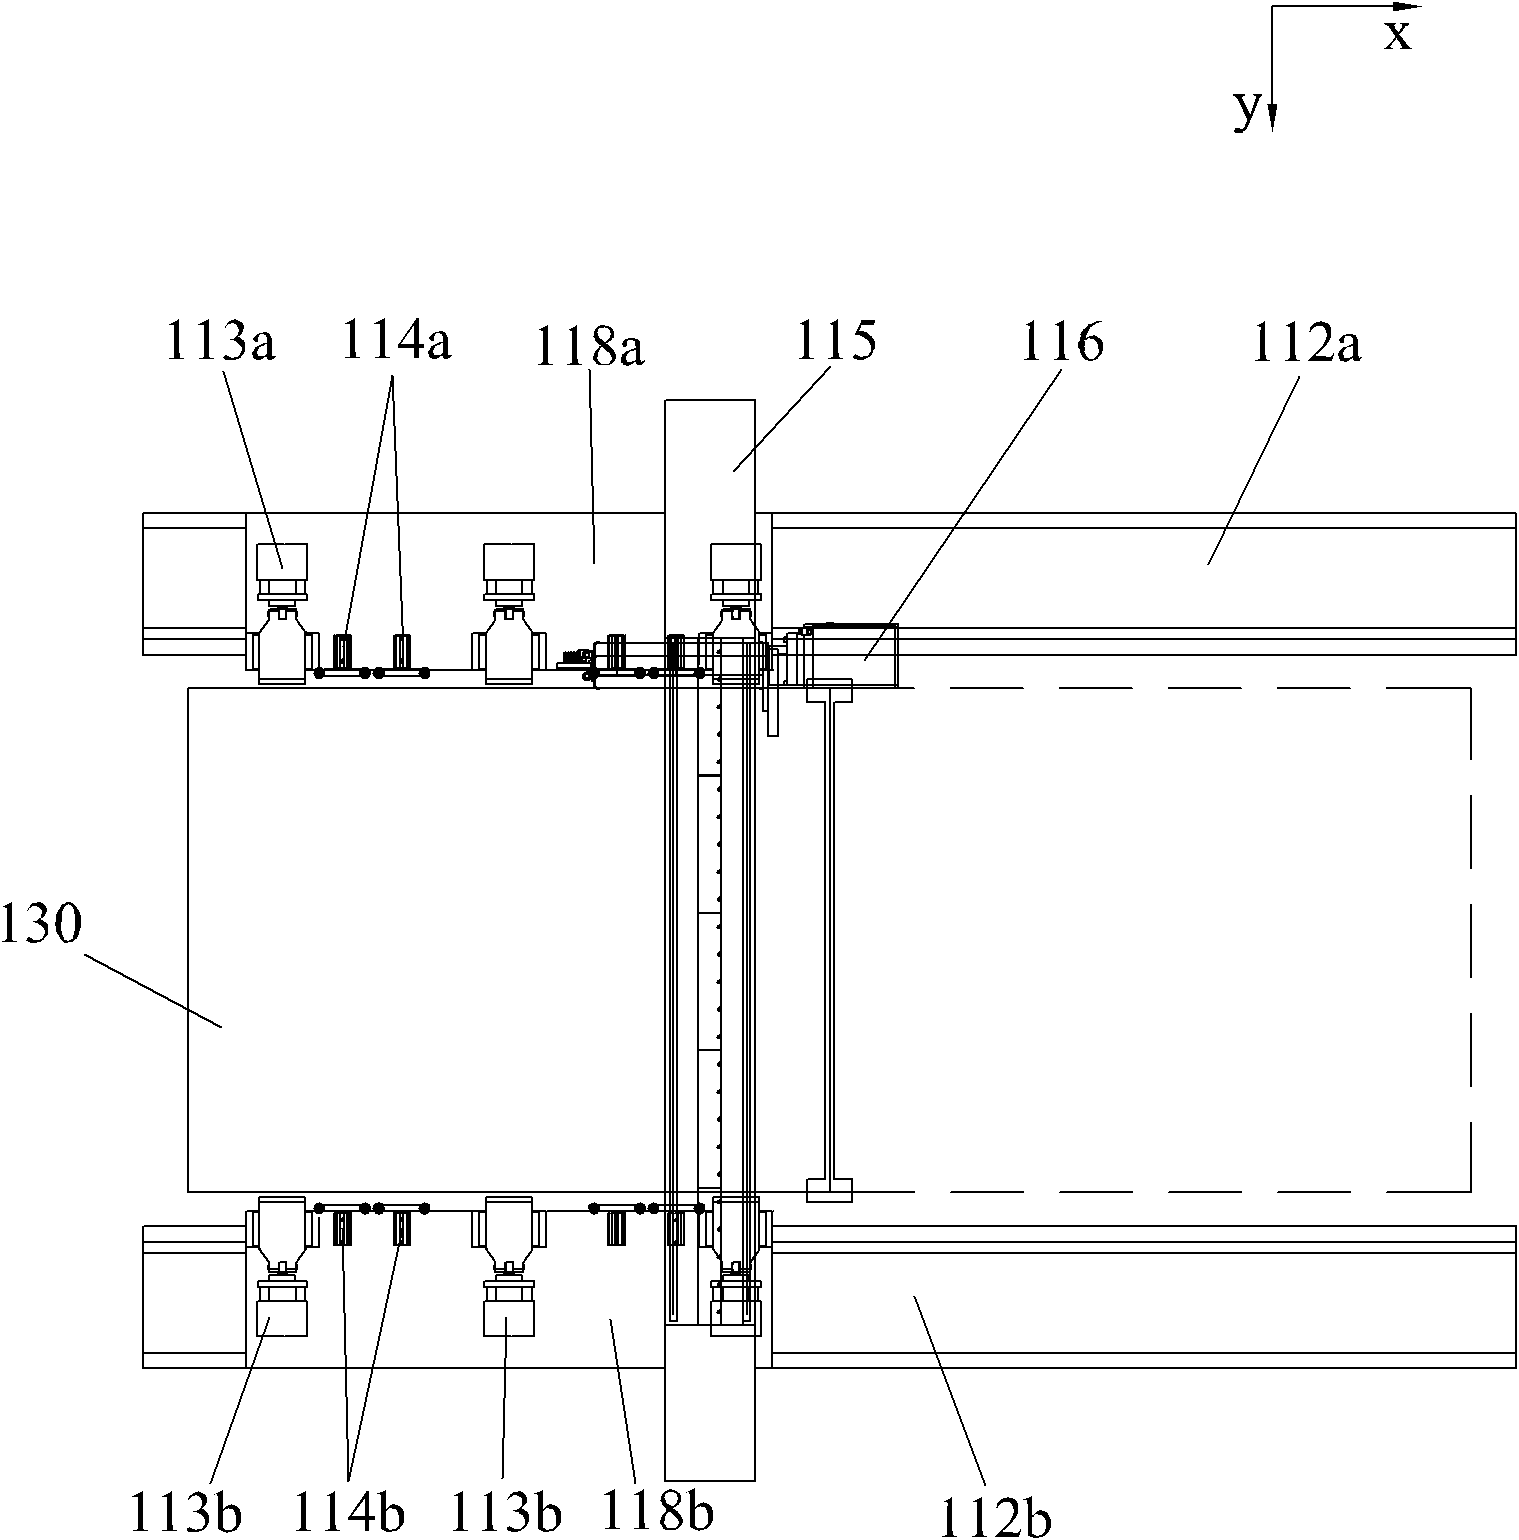 Synchronous dust removing device